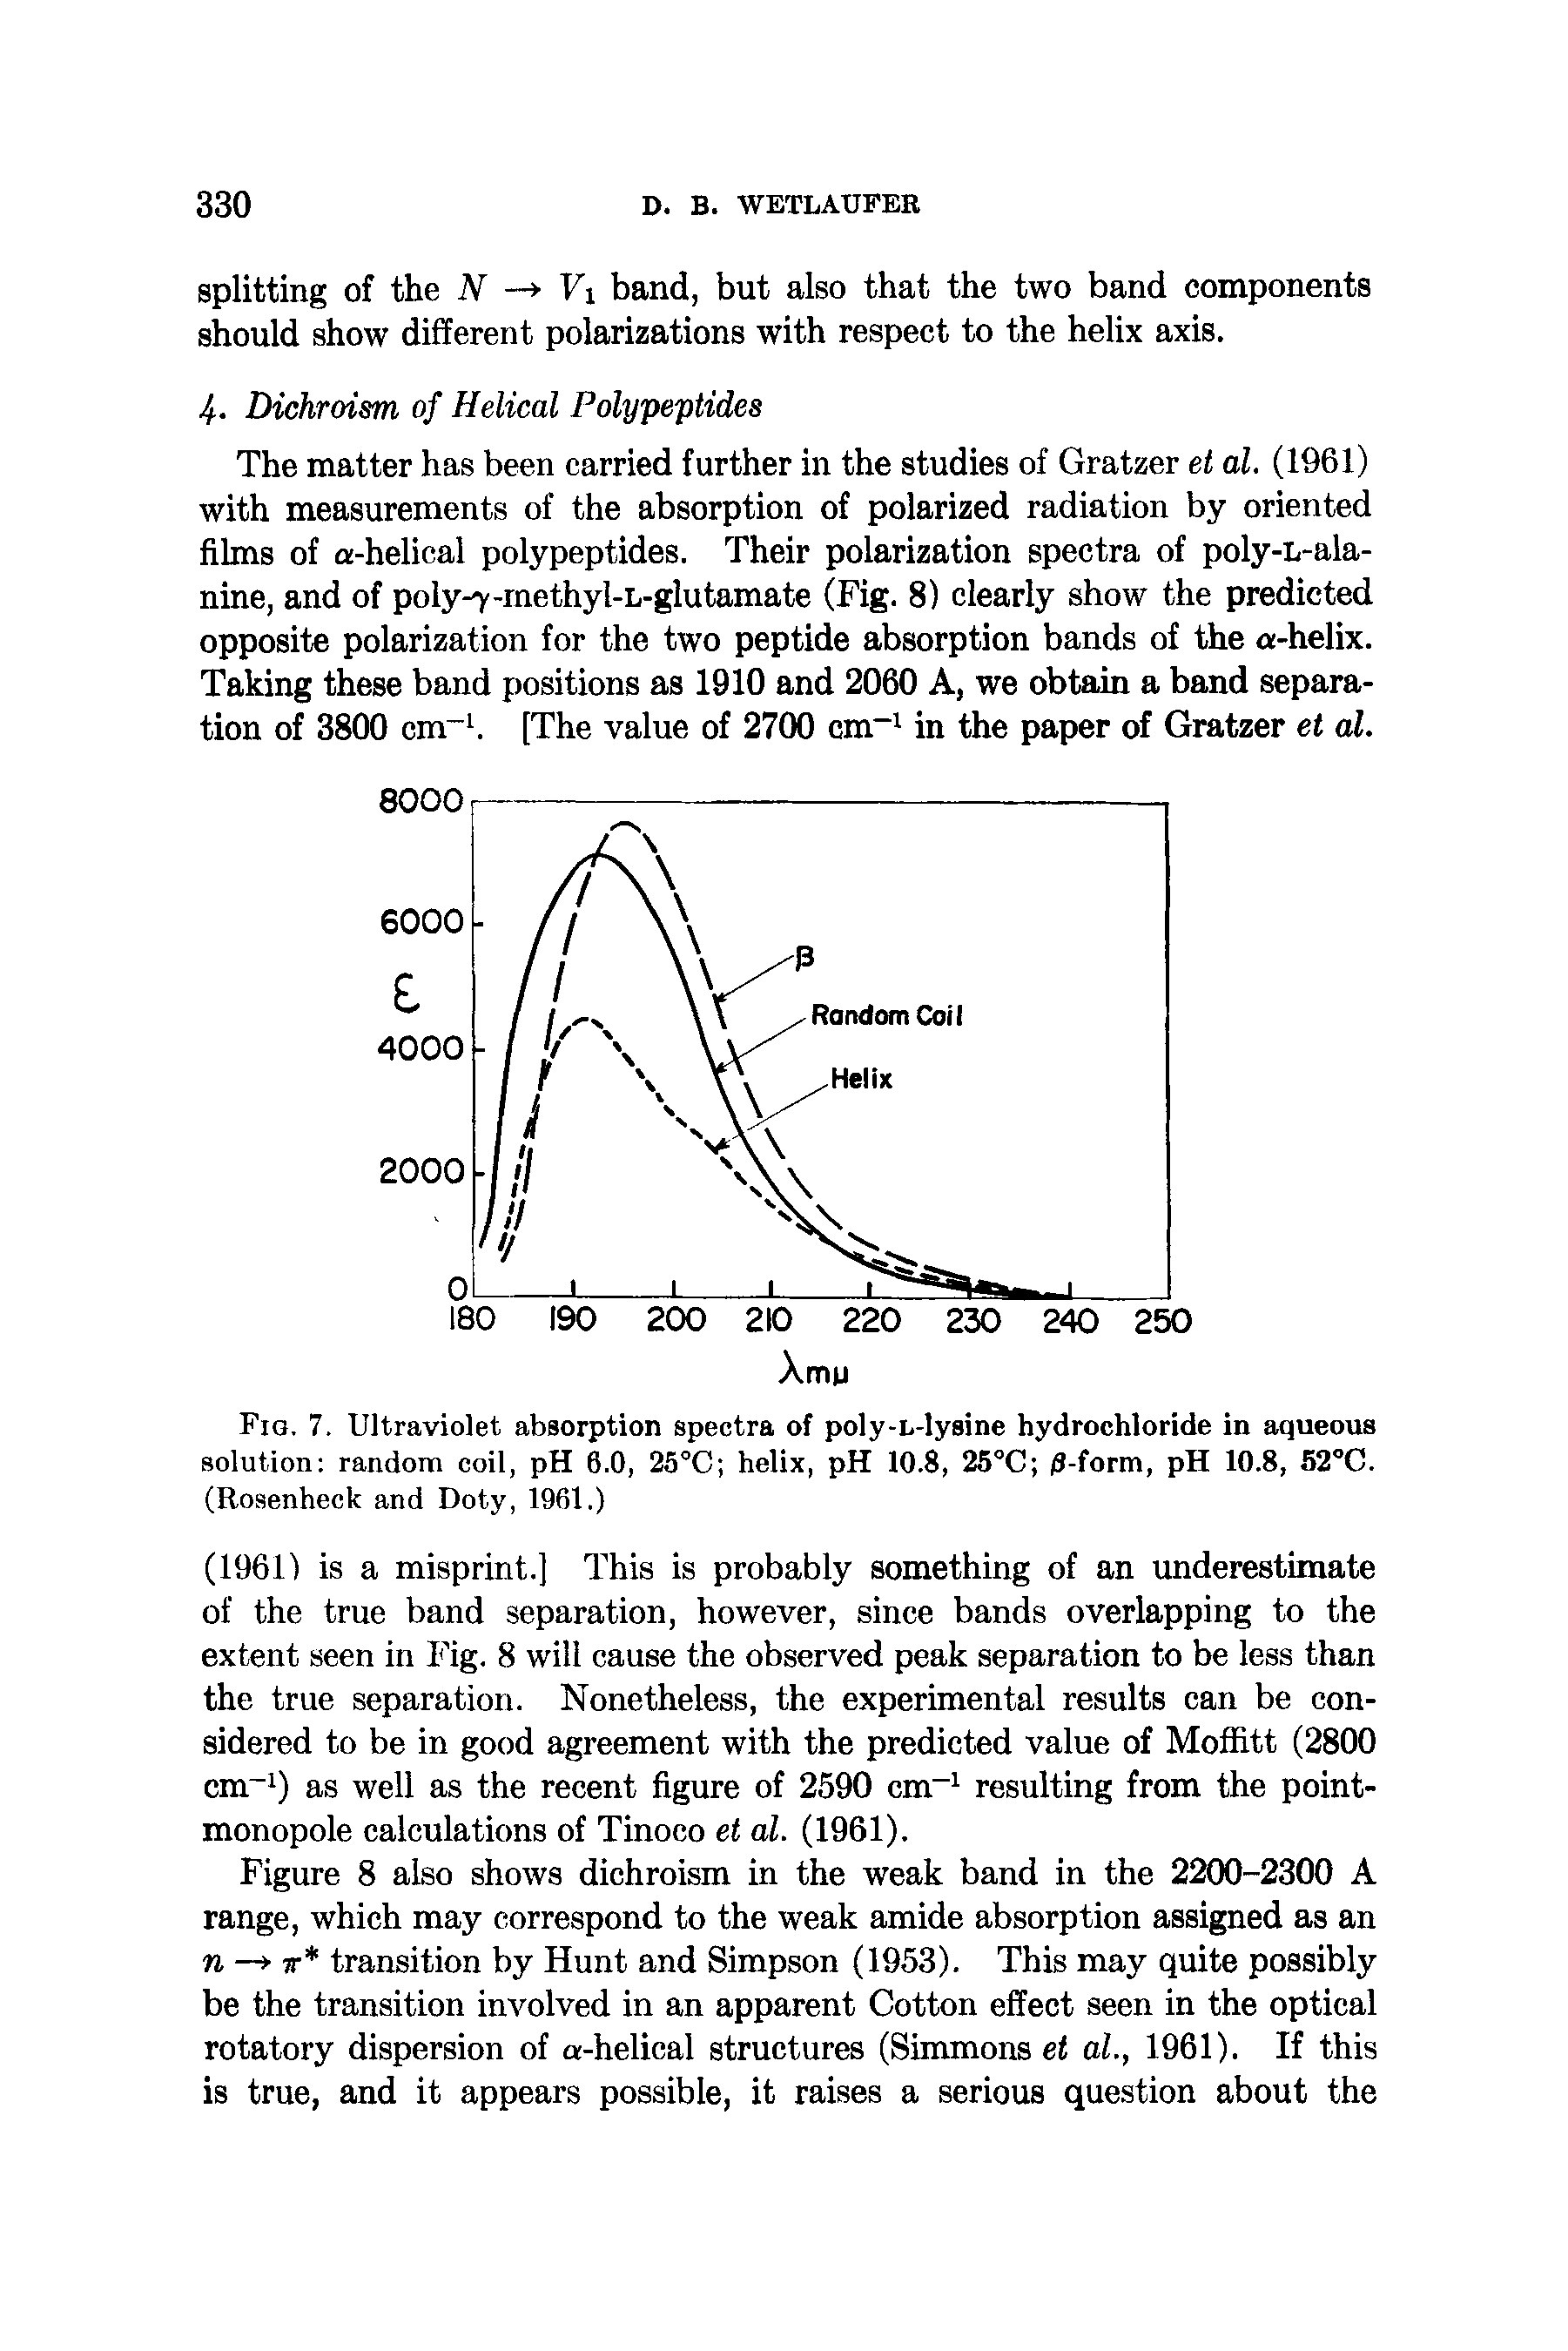 Fig. 7. Ultraviolet absorption spectra of poly-L-lysine hydrochloride in aqueous solution random coil, pH 6.0, 25°C helix, pH 10.8, 25°C /3-form, pH 10.8, 52°C.